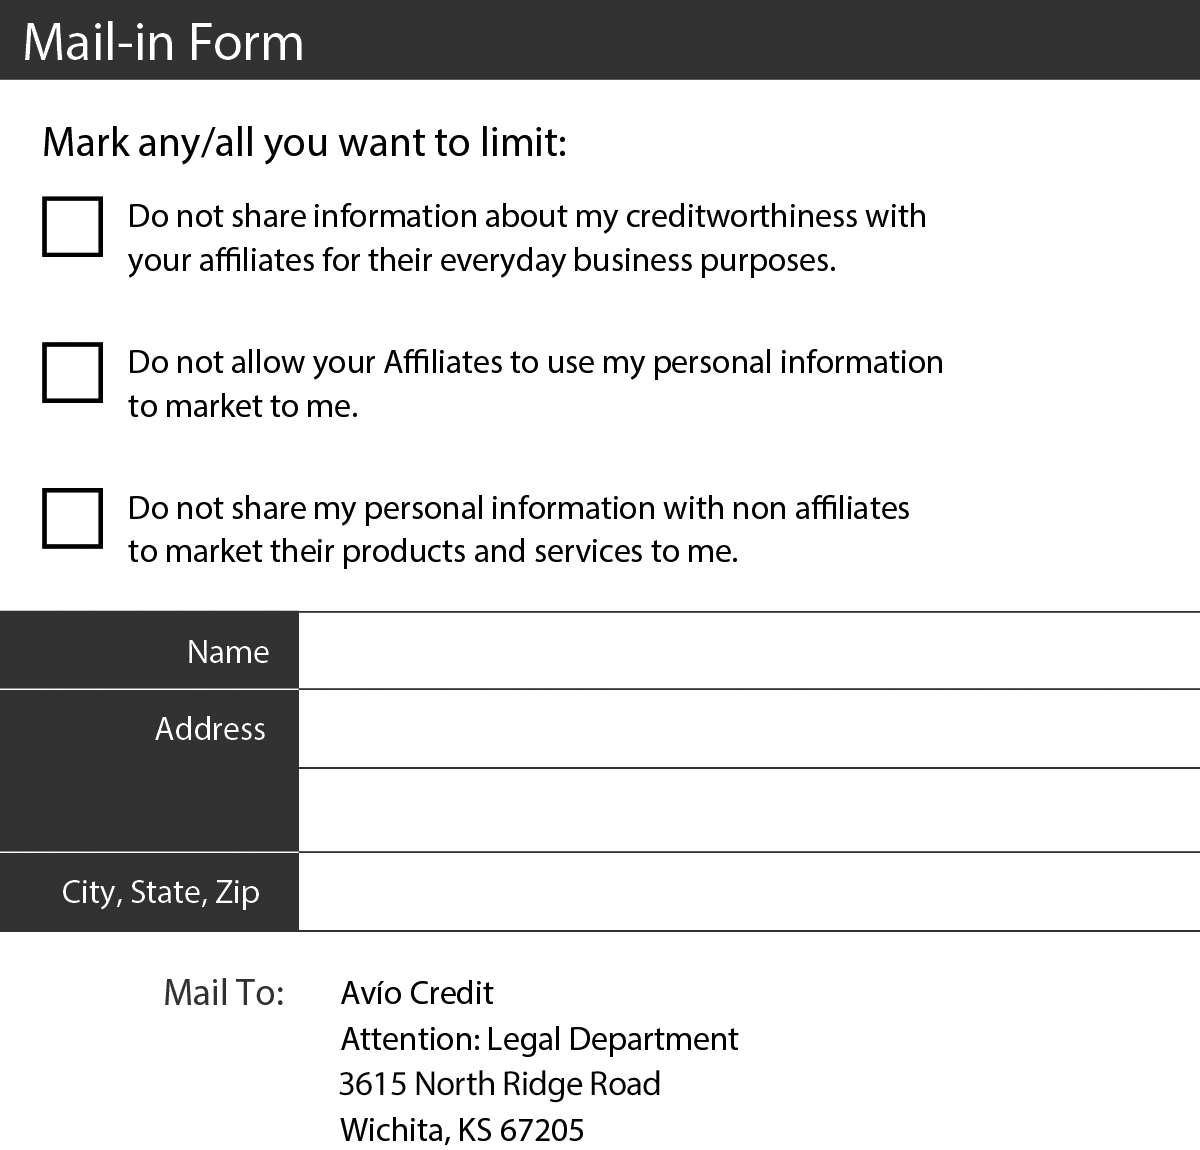 Opt-out mail form